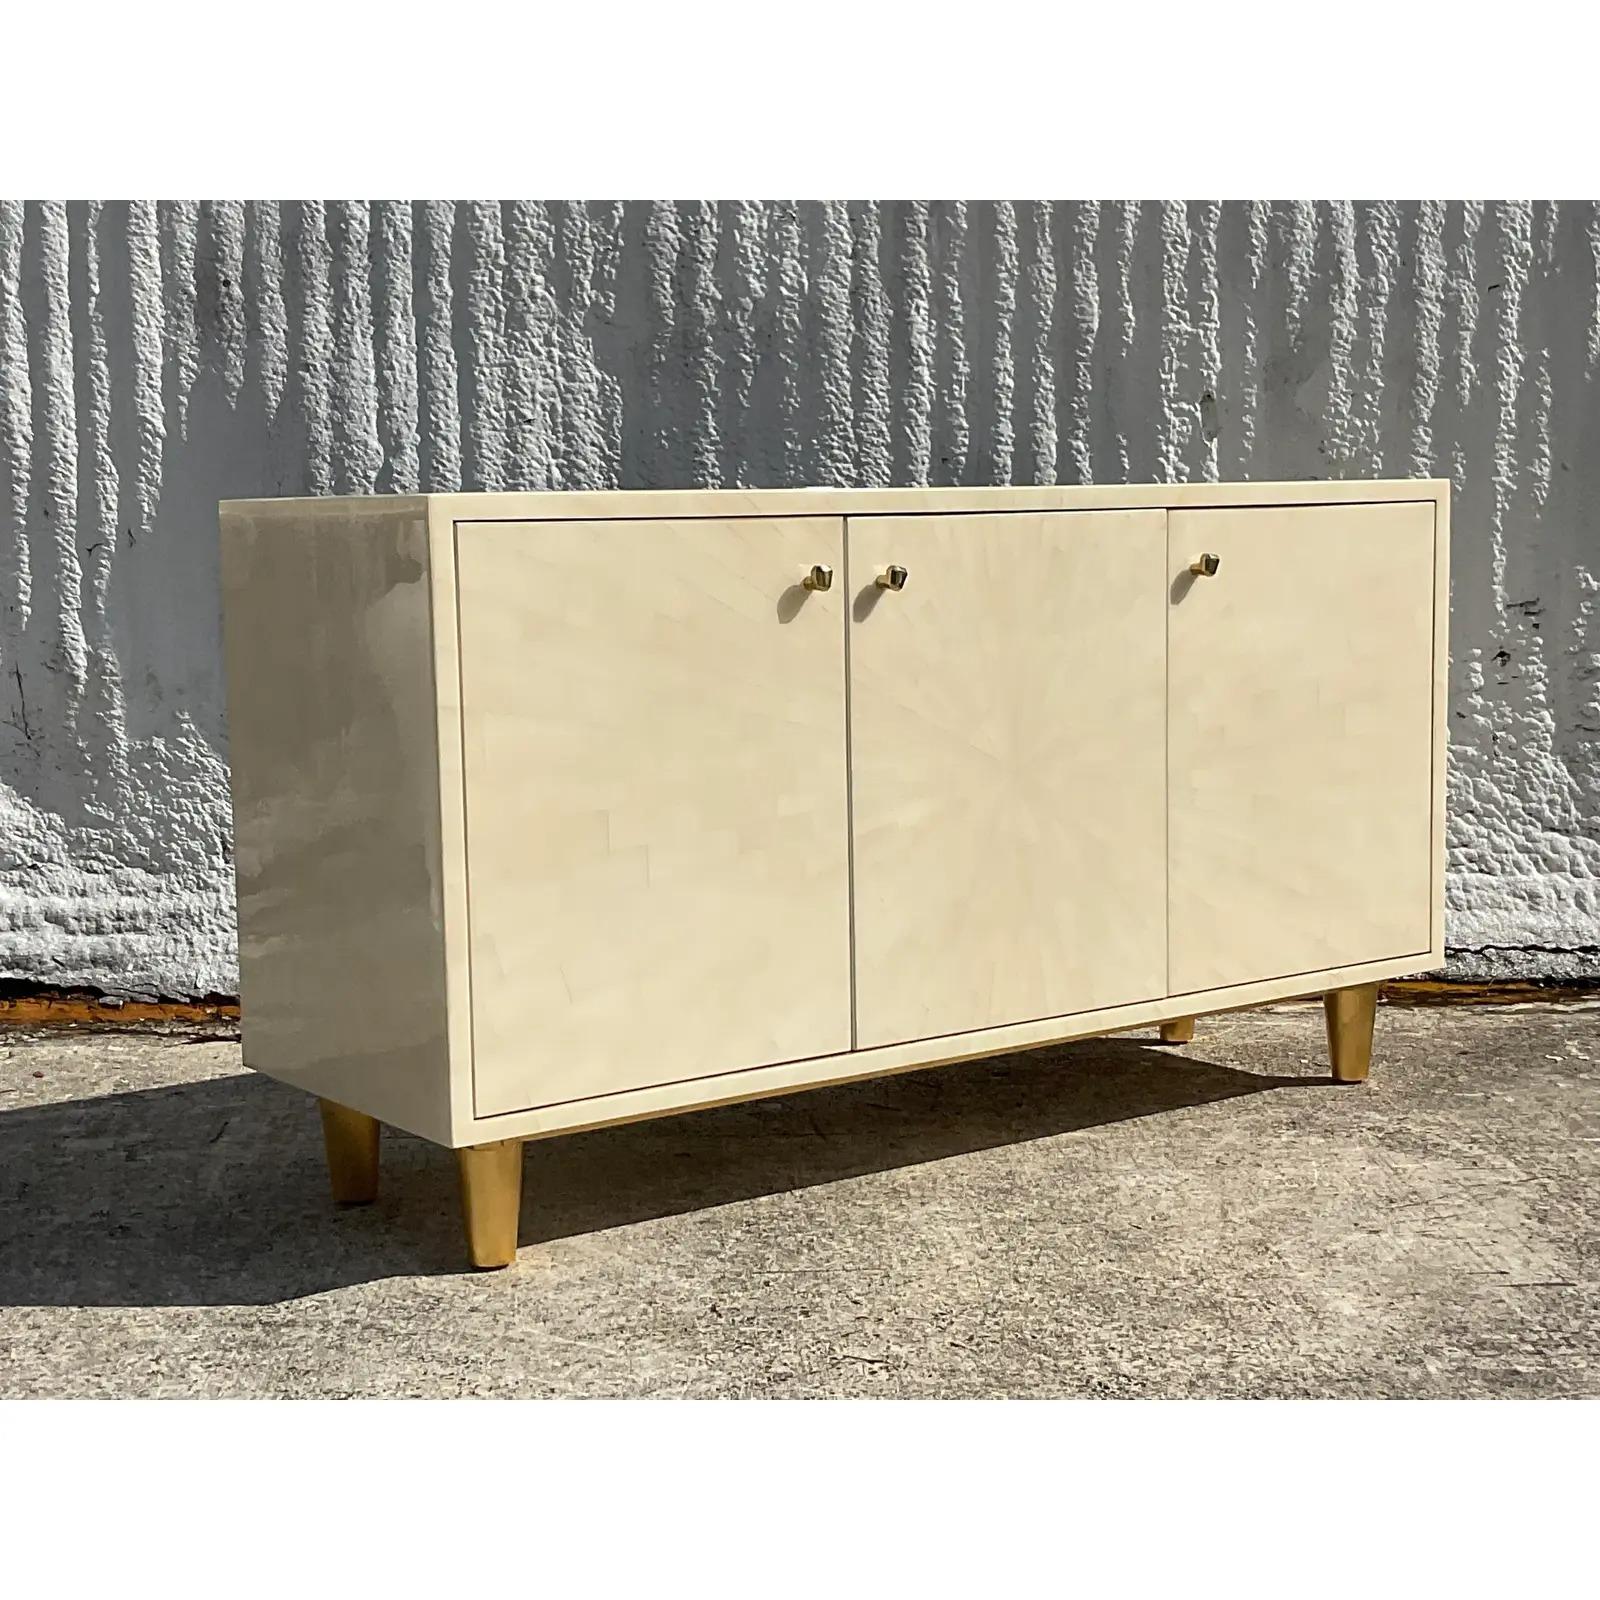 North American Vintage Contemporary Made Goods “Torion” Faux Horn Credenza